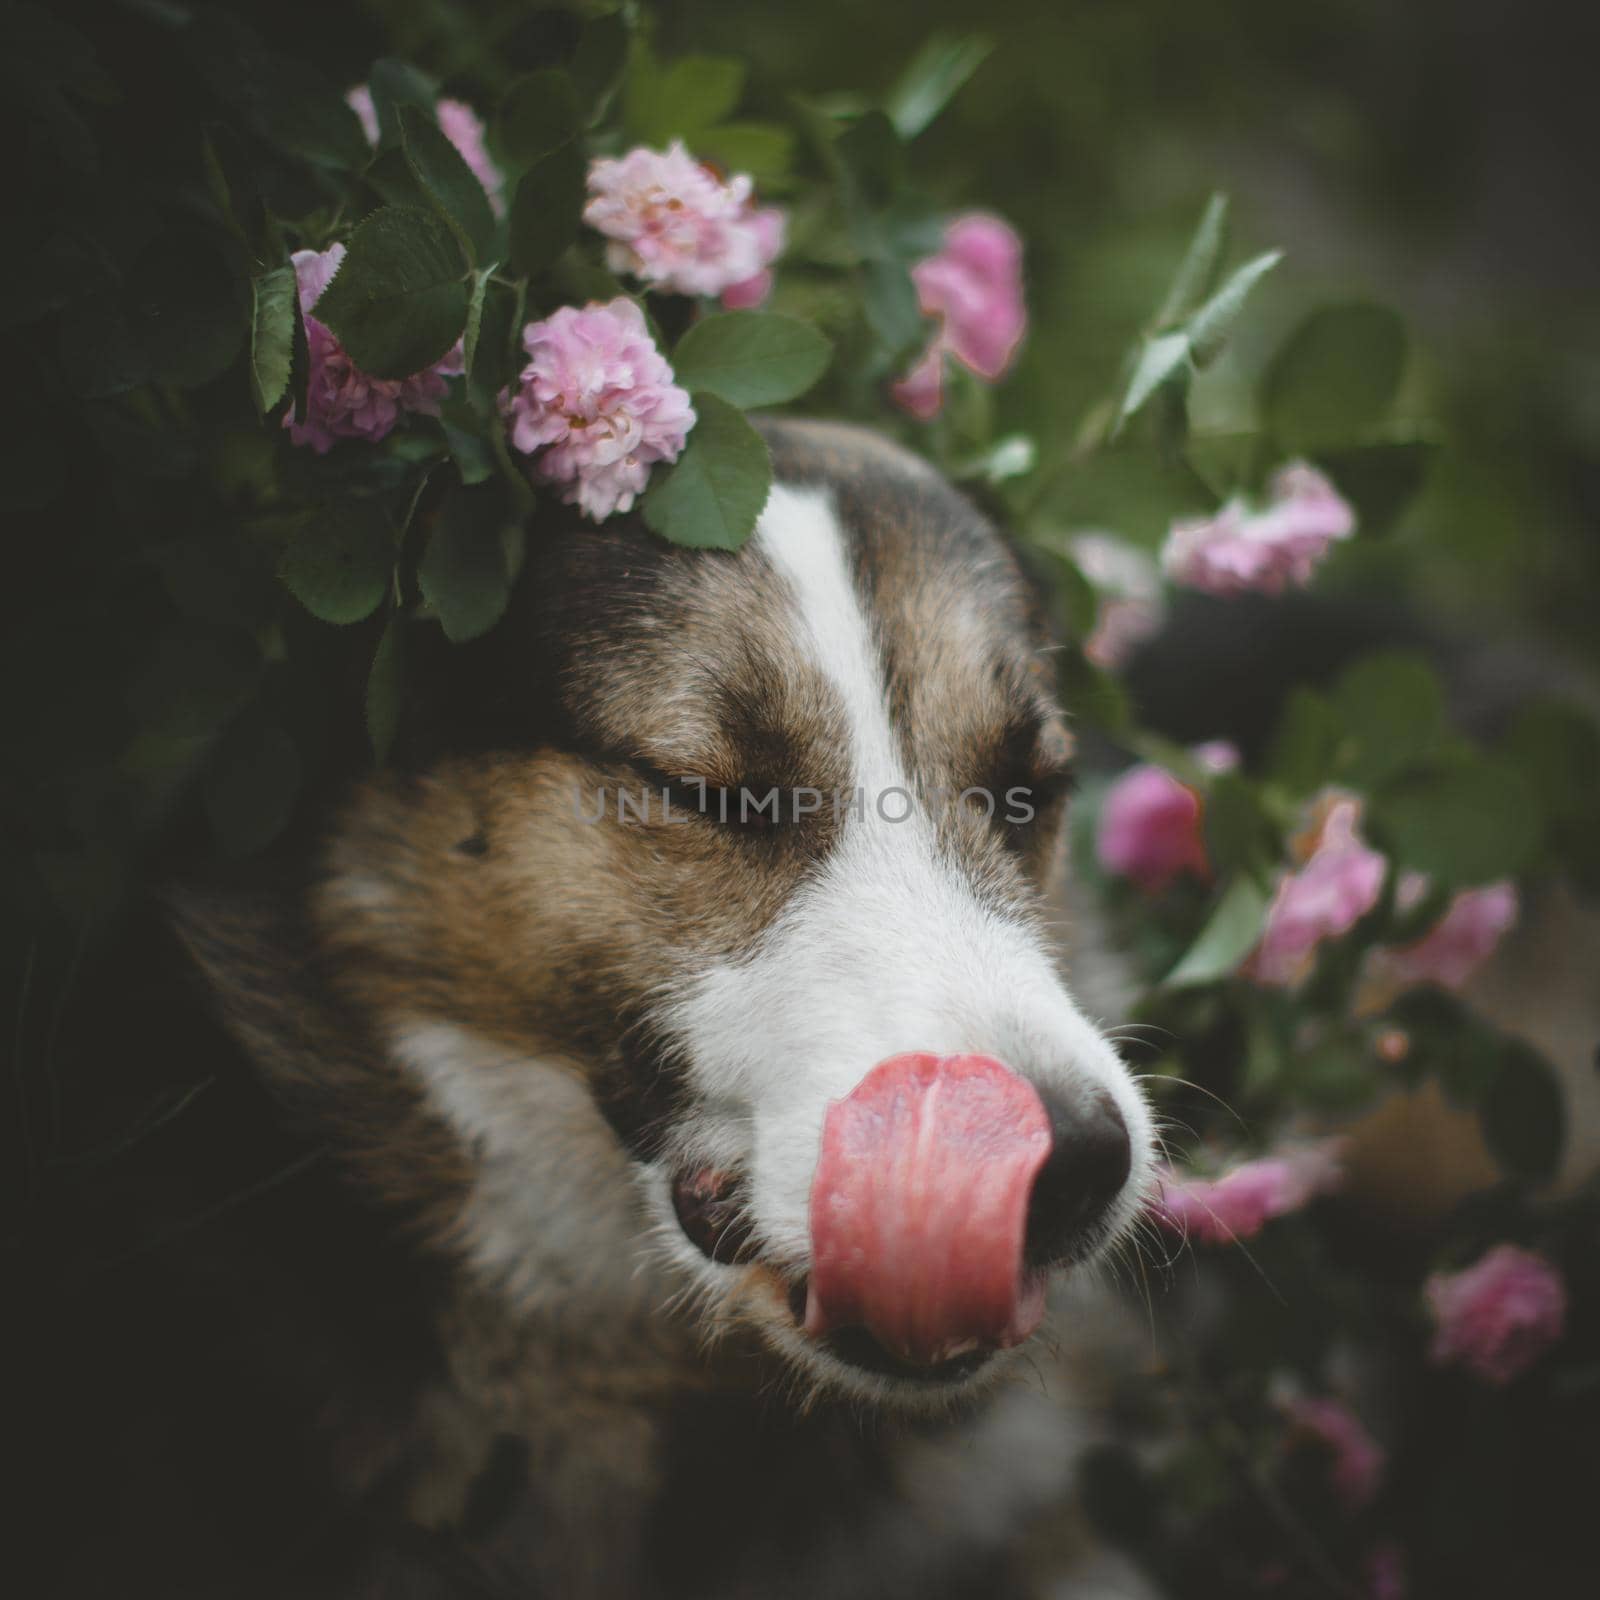 Mixed breed dog sitting in a garden with roses